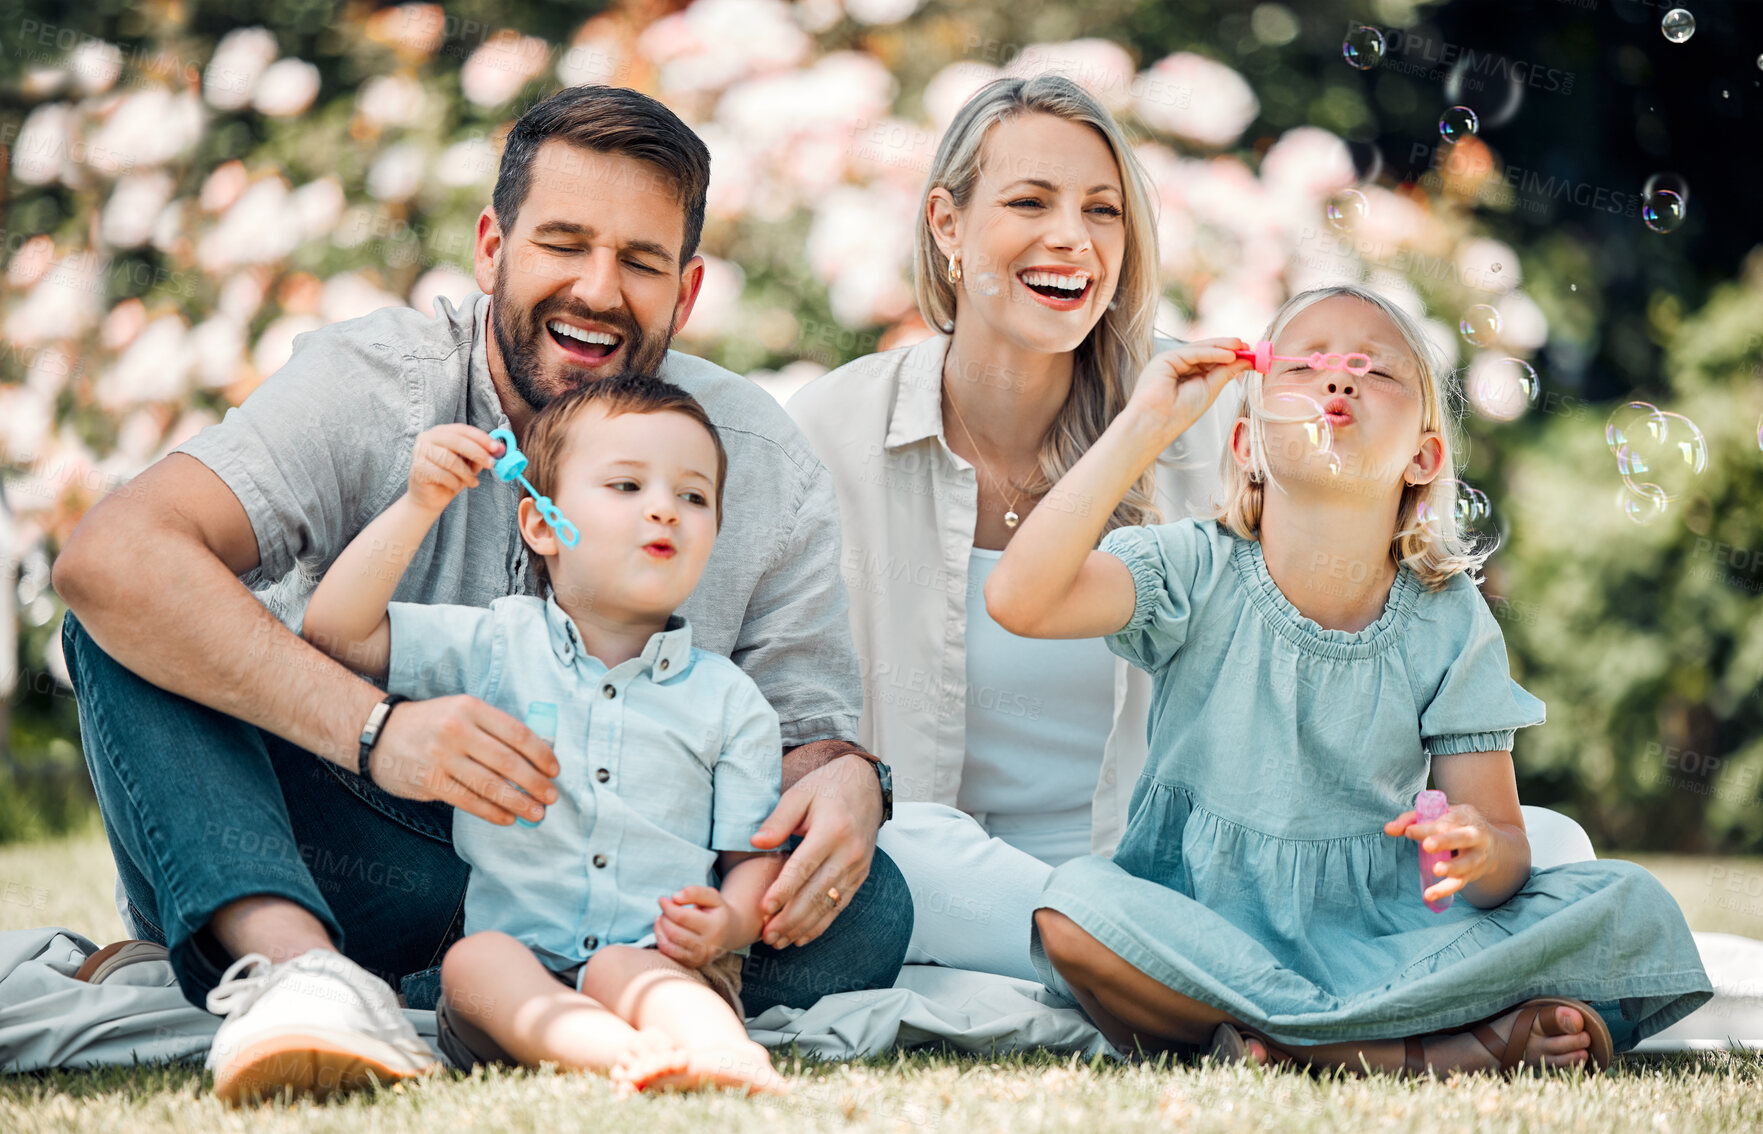 Buy stock photo Smiling caucasian family blowing soap bubbles for fun while relaxing together in the park or garden outside on a sunny day. Loving parents bonding with playful kids enjoying a carefree happy childhood